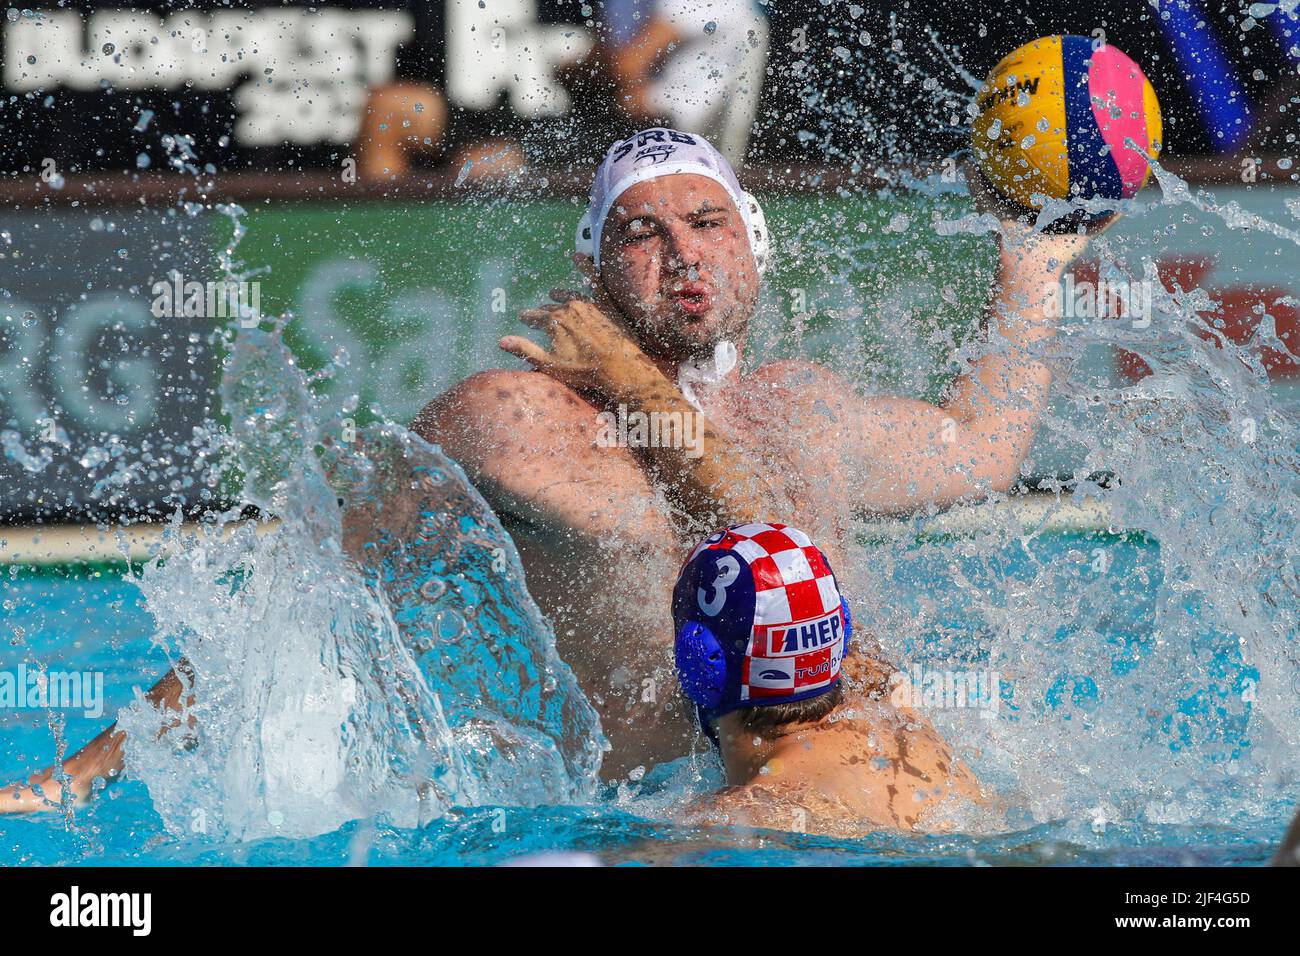 BUDAPEST, HUNGARY - JUNE 29: Dusan Mandic of Serbia, Ivan Krapic of Croatia during the FINA World Championships Budapest 2022 Quarter final match between Serbia and Croatia on June 29, 2022 in Budapest, Hungary (Photo by Albert ten Hove/Orange Pictures) Stock Photo